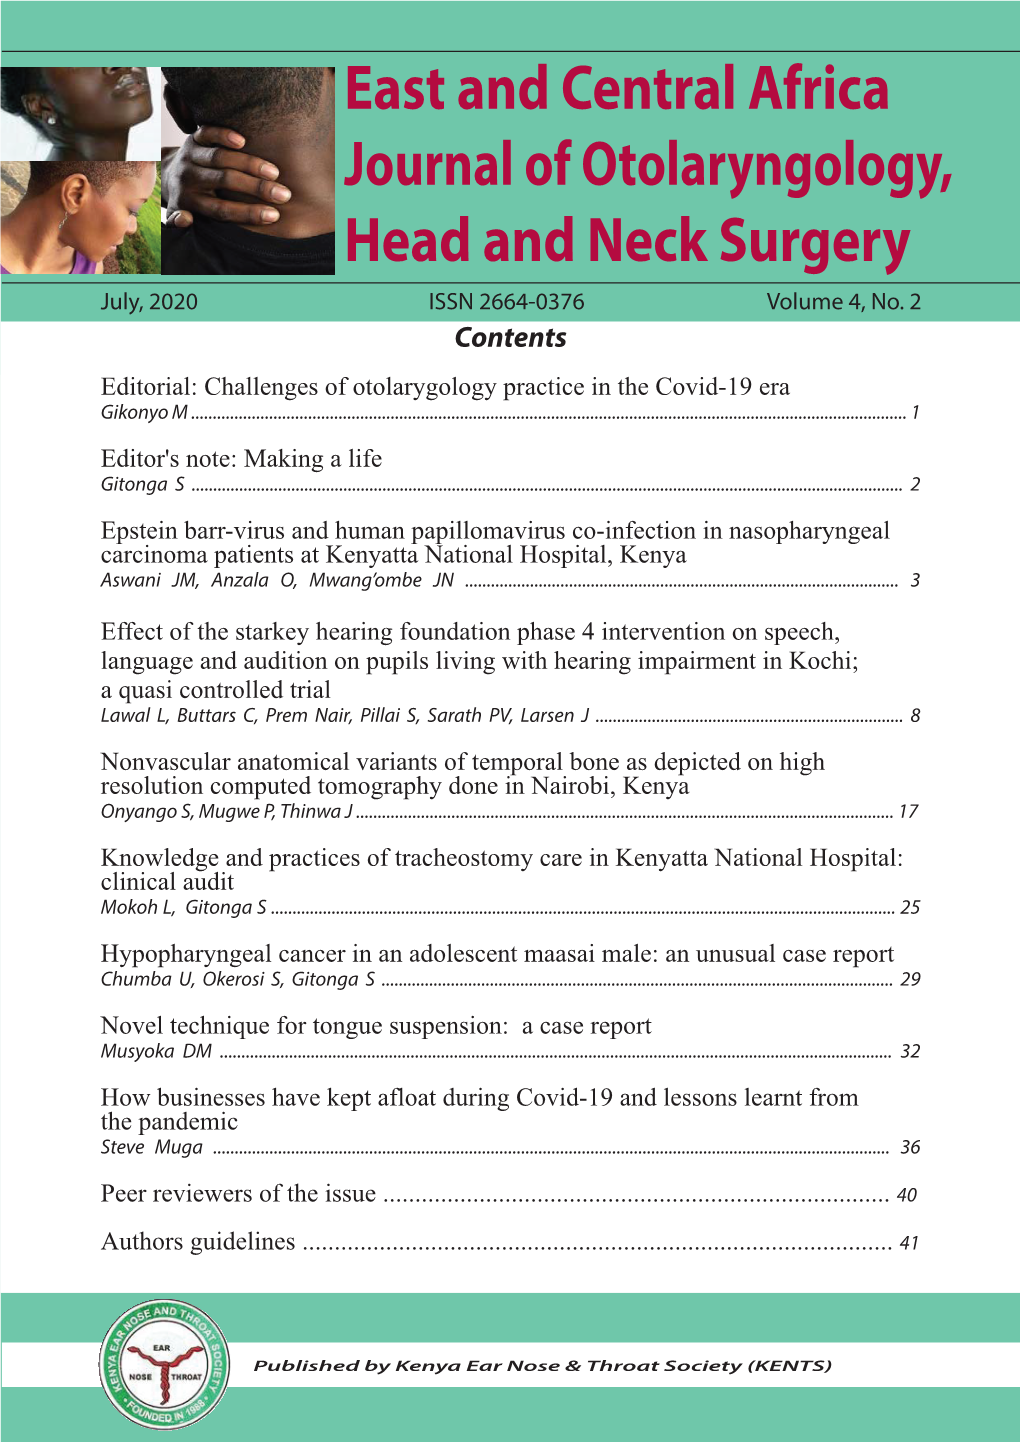 East and Central Africa Journal of Otolaryngology, Head and Neck Surgery July, 2020 ISSN 2664-0376 Volume 4, No